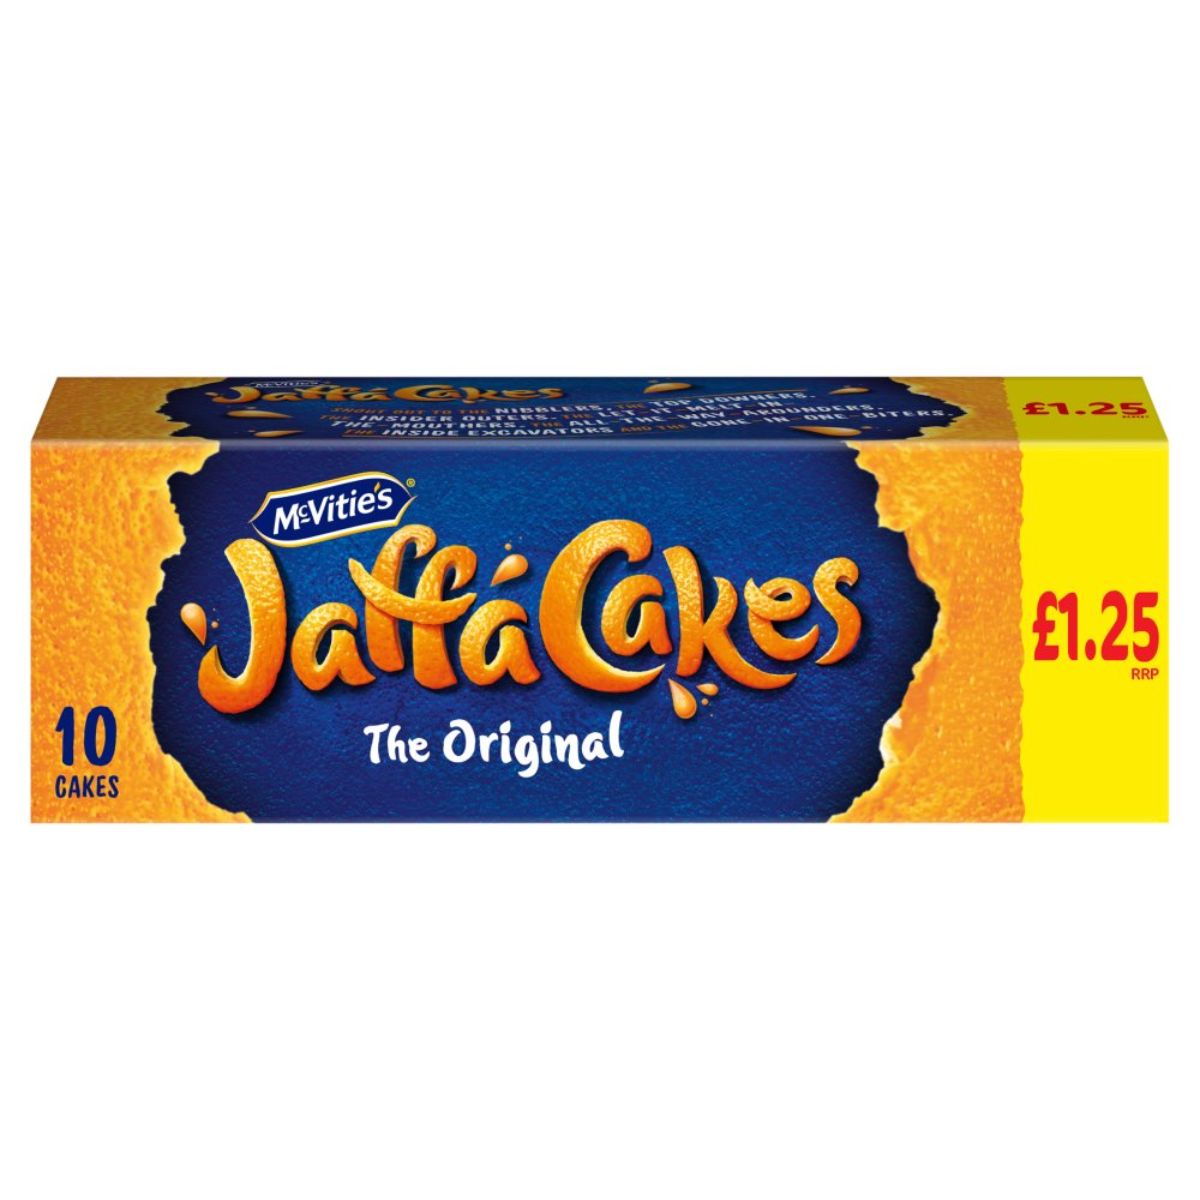 A box of McVities - Jaffa Cakes Original Biscuits - 10 Pack on a white background.